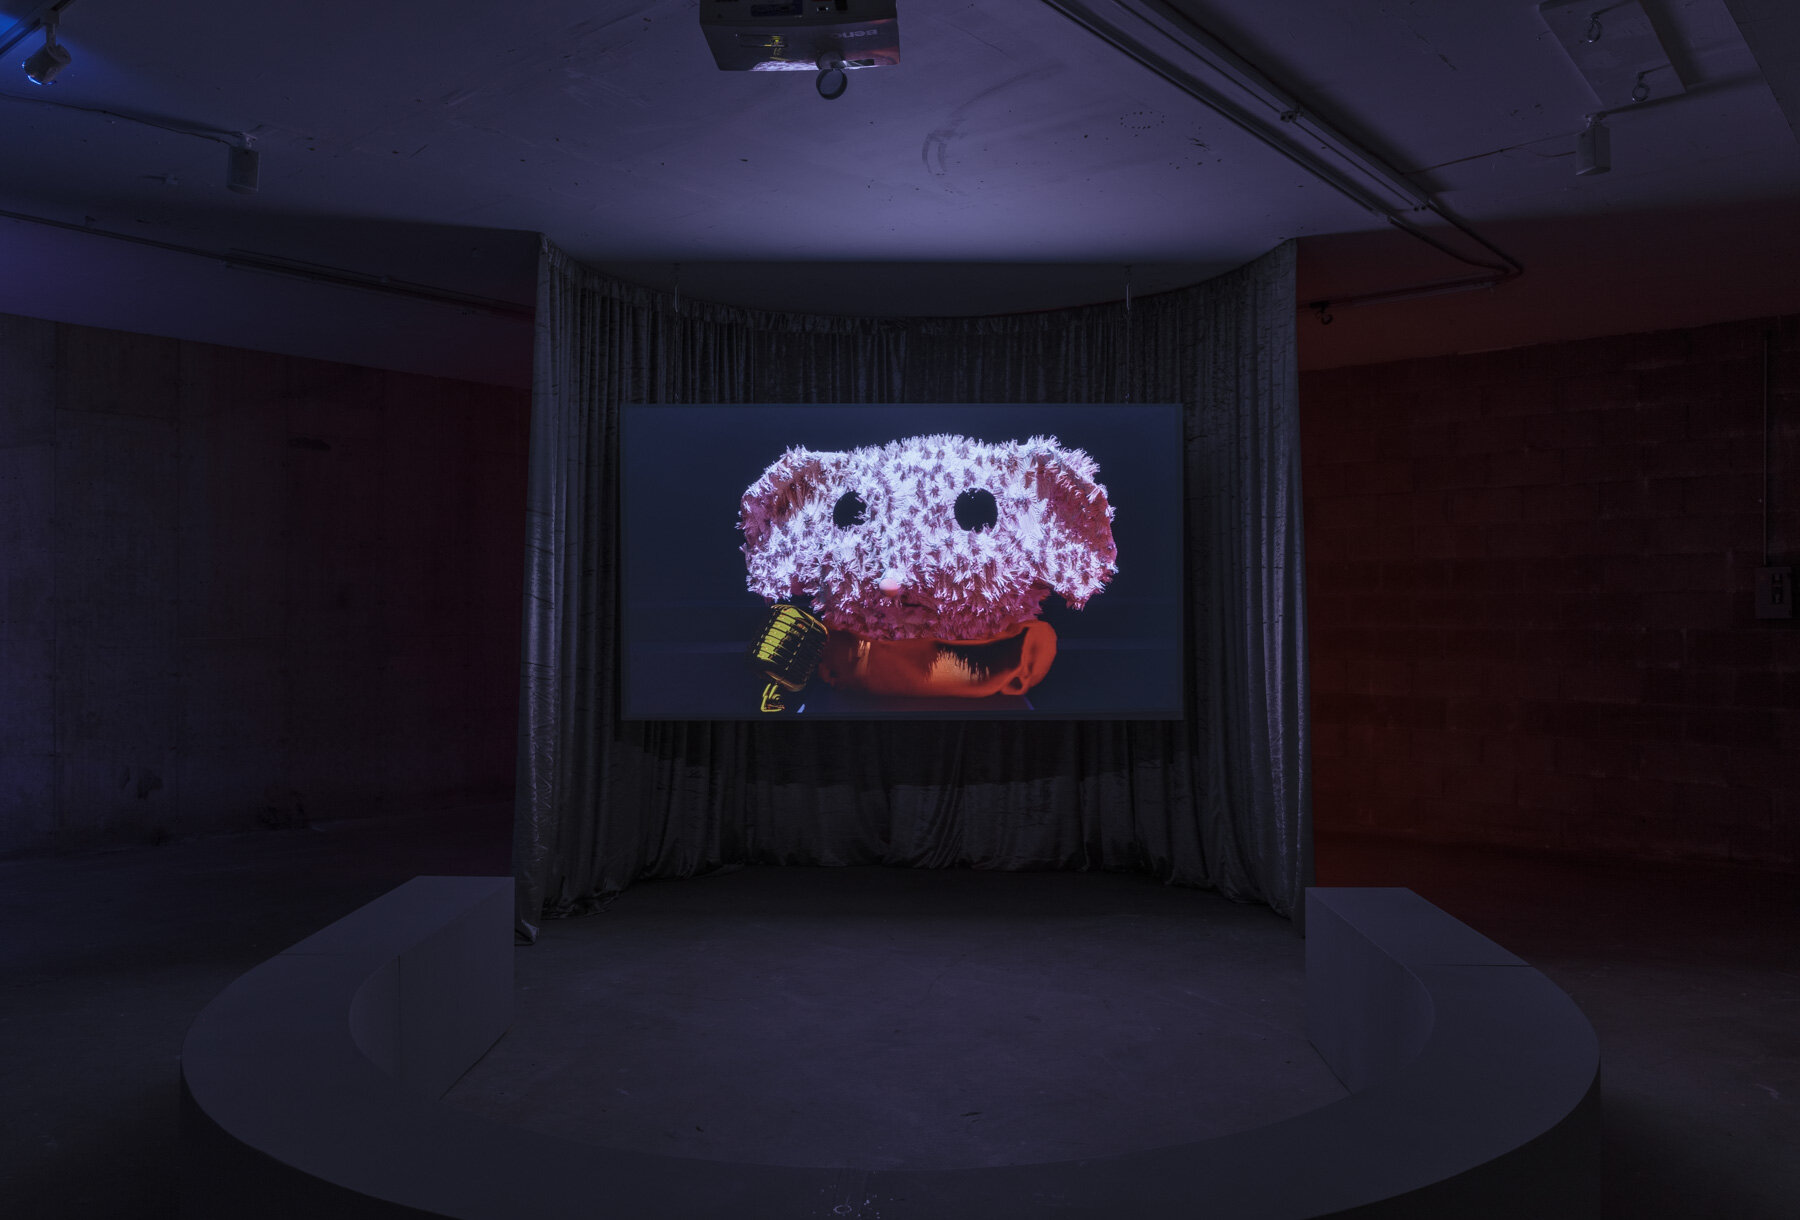  Bea Orlandi,  CHORALE (for convergence) , 2019 Velvet curtain, bench, HD video projection, 1 min, loop   	  